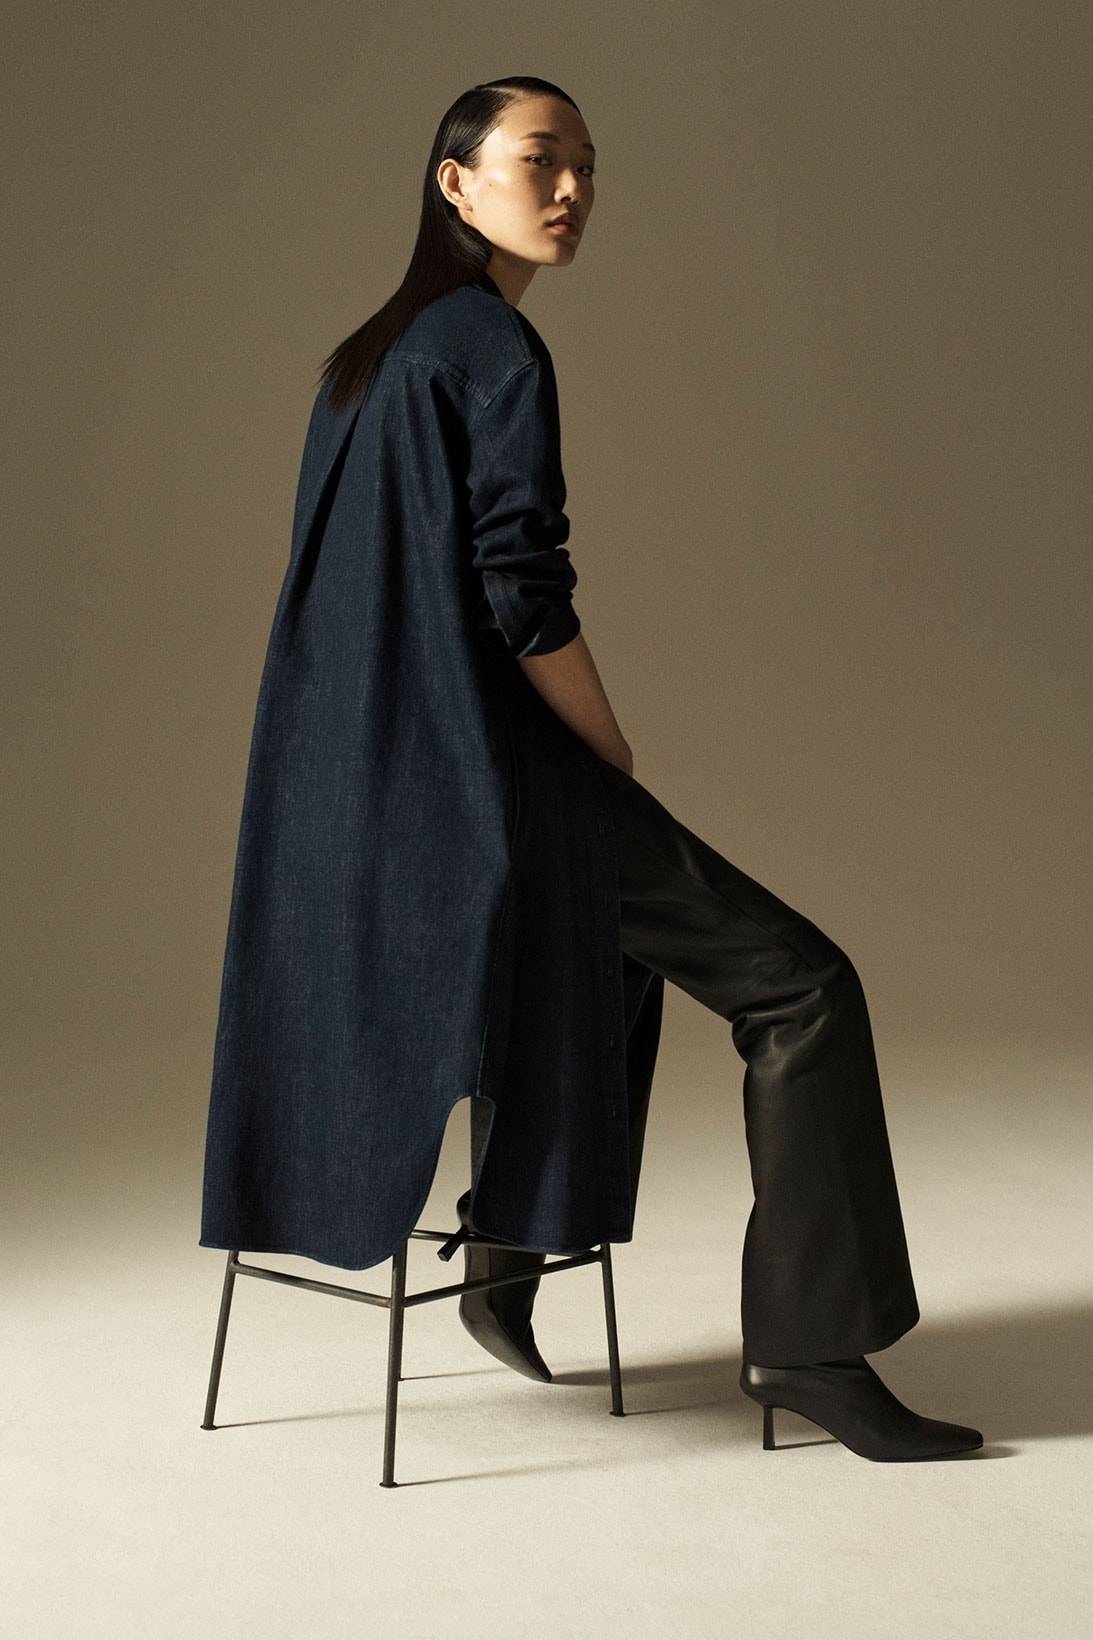 cos spring summer 2021 ss21 sustainable denim collection jeans sora choi shirt boots chair sitting